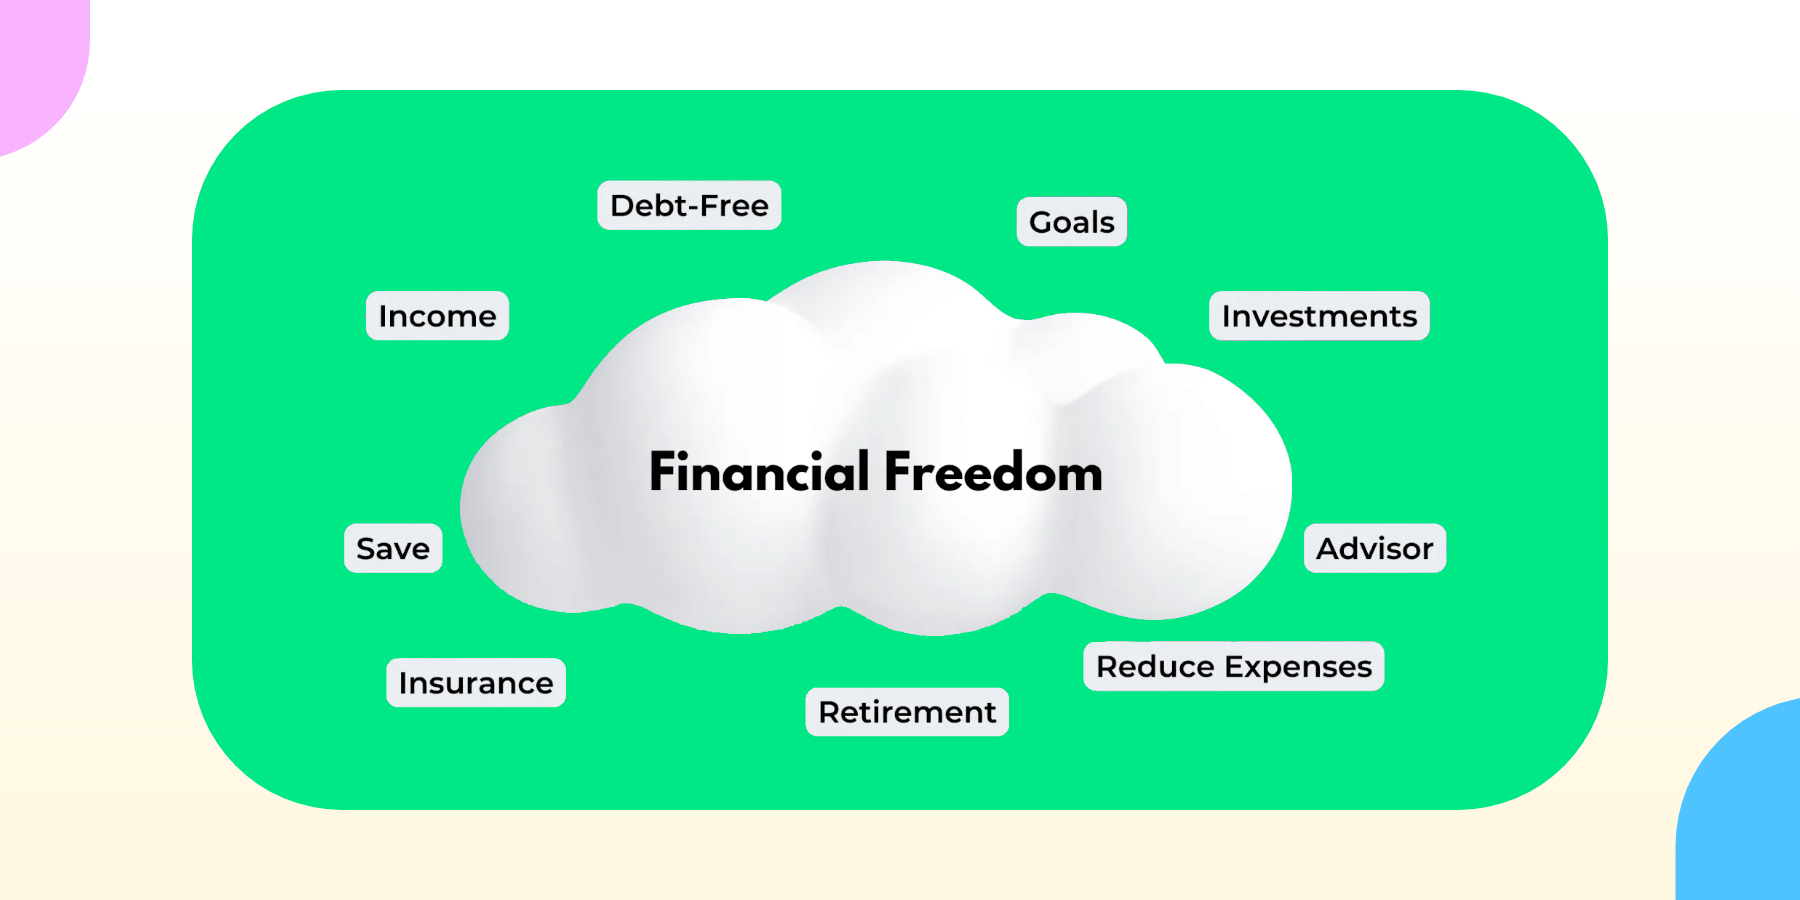 Financial freedom, debt free, goals, investments, advisor, save, insurance, retirement, reduce expenses, income, 